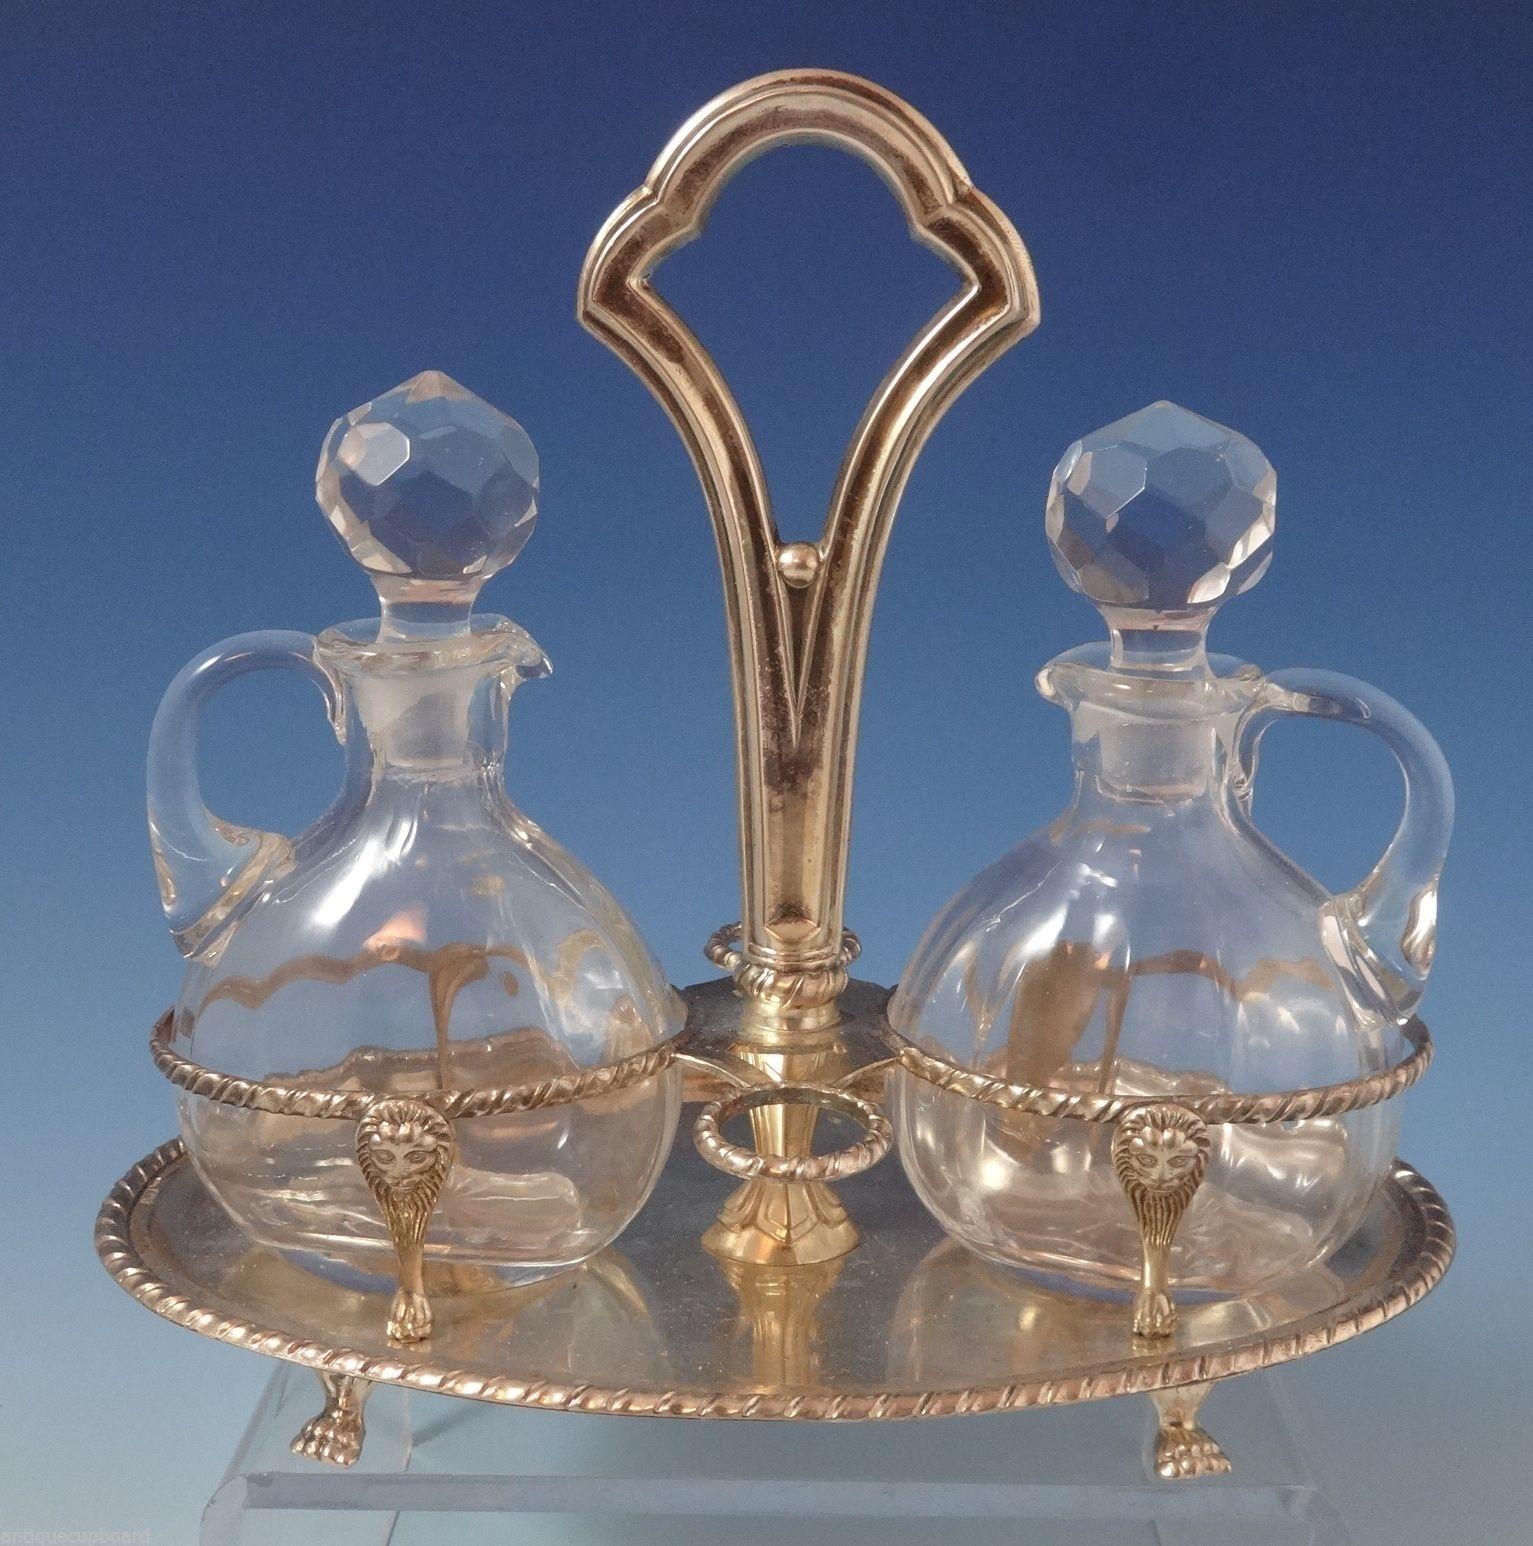 Saint Mark / San Marco by Zarmella Argenti

Marvelous Saint Mark / San Marco by Zarmella Argenti (did work for Buccellati) cruet set. The tray is made of .800 silver, and it includes two crystal/glass bottles with stoppers. The tray measures 8 x 4